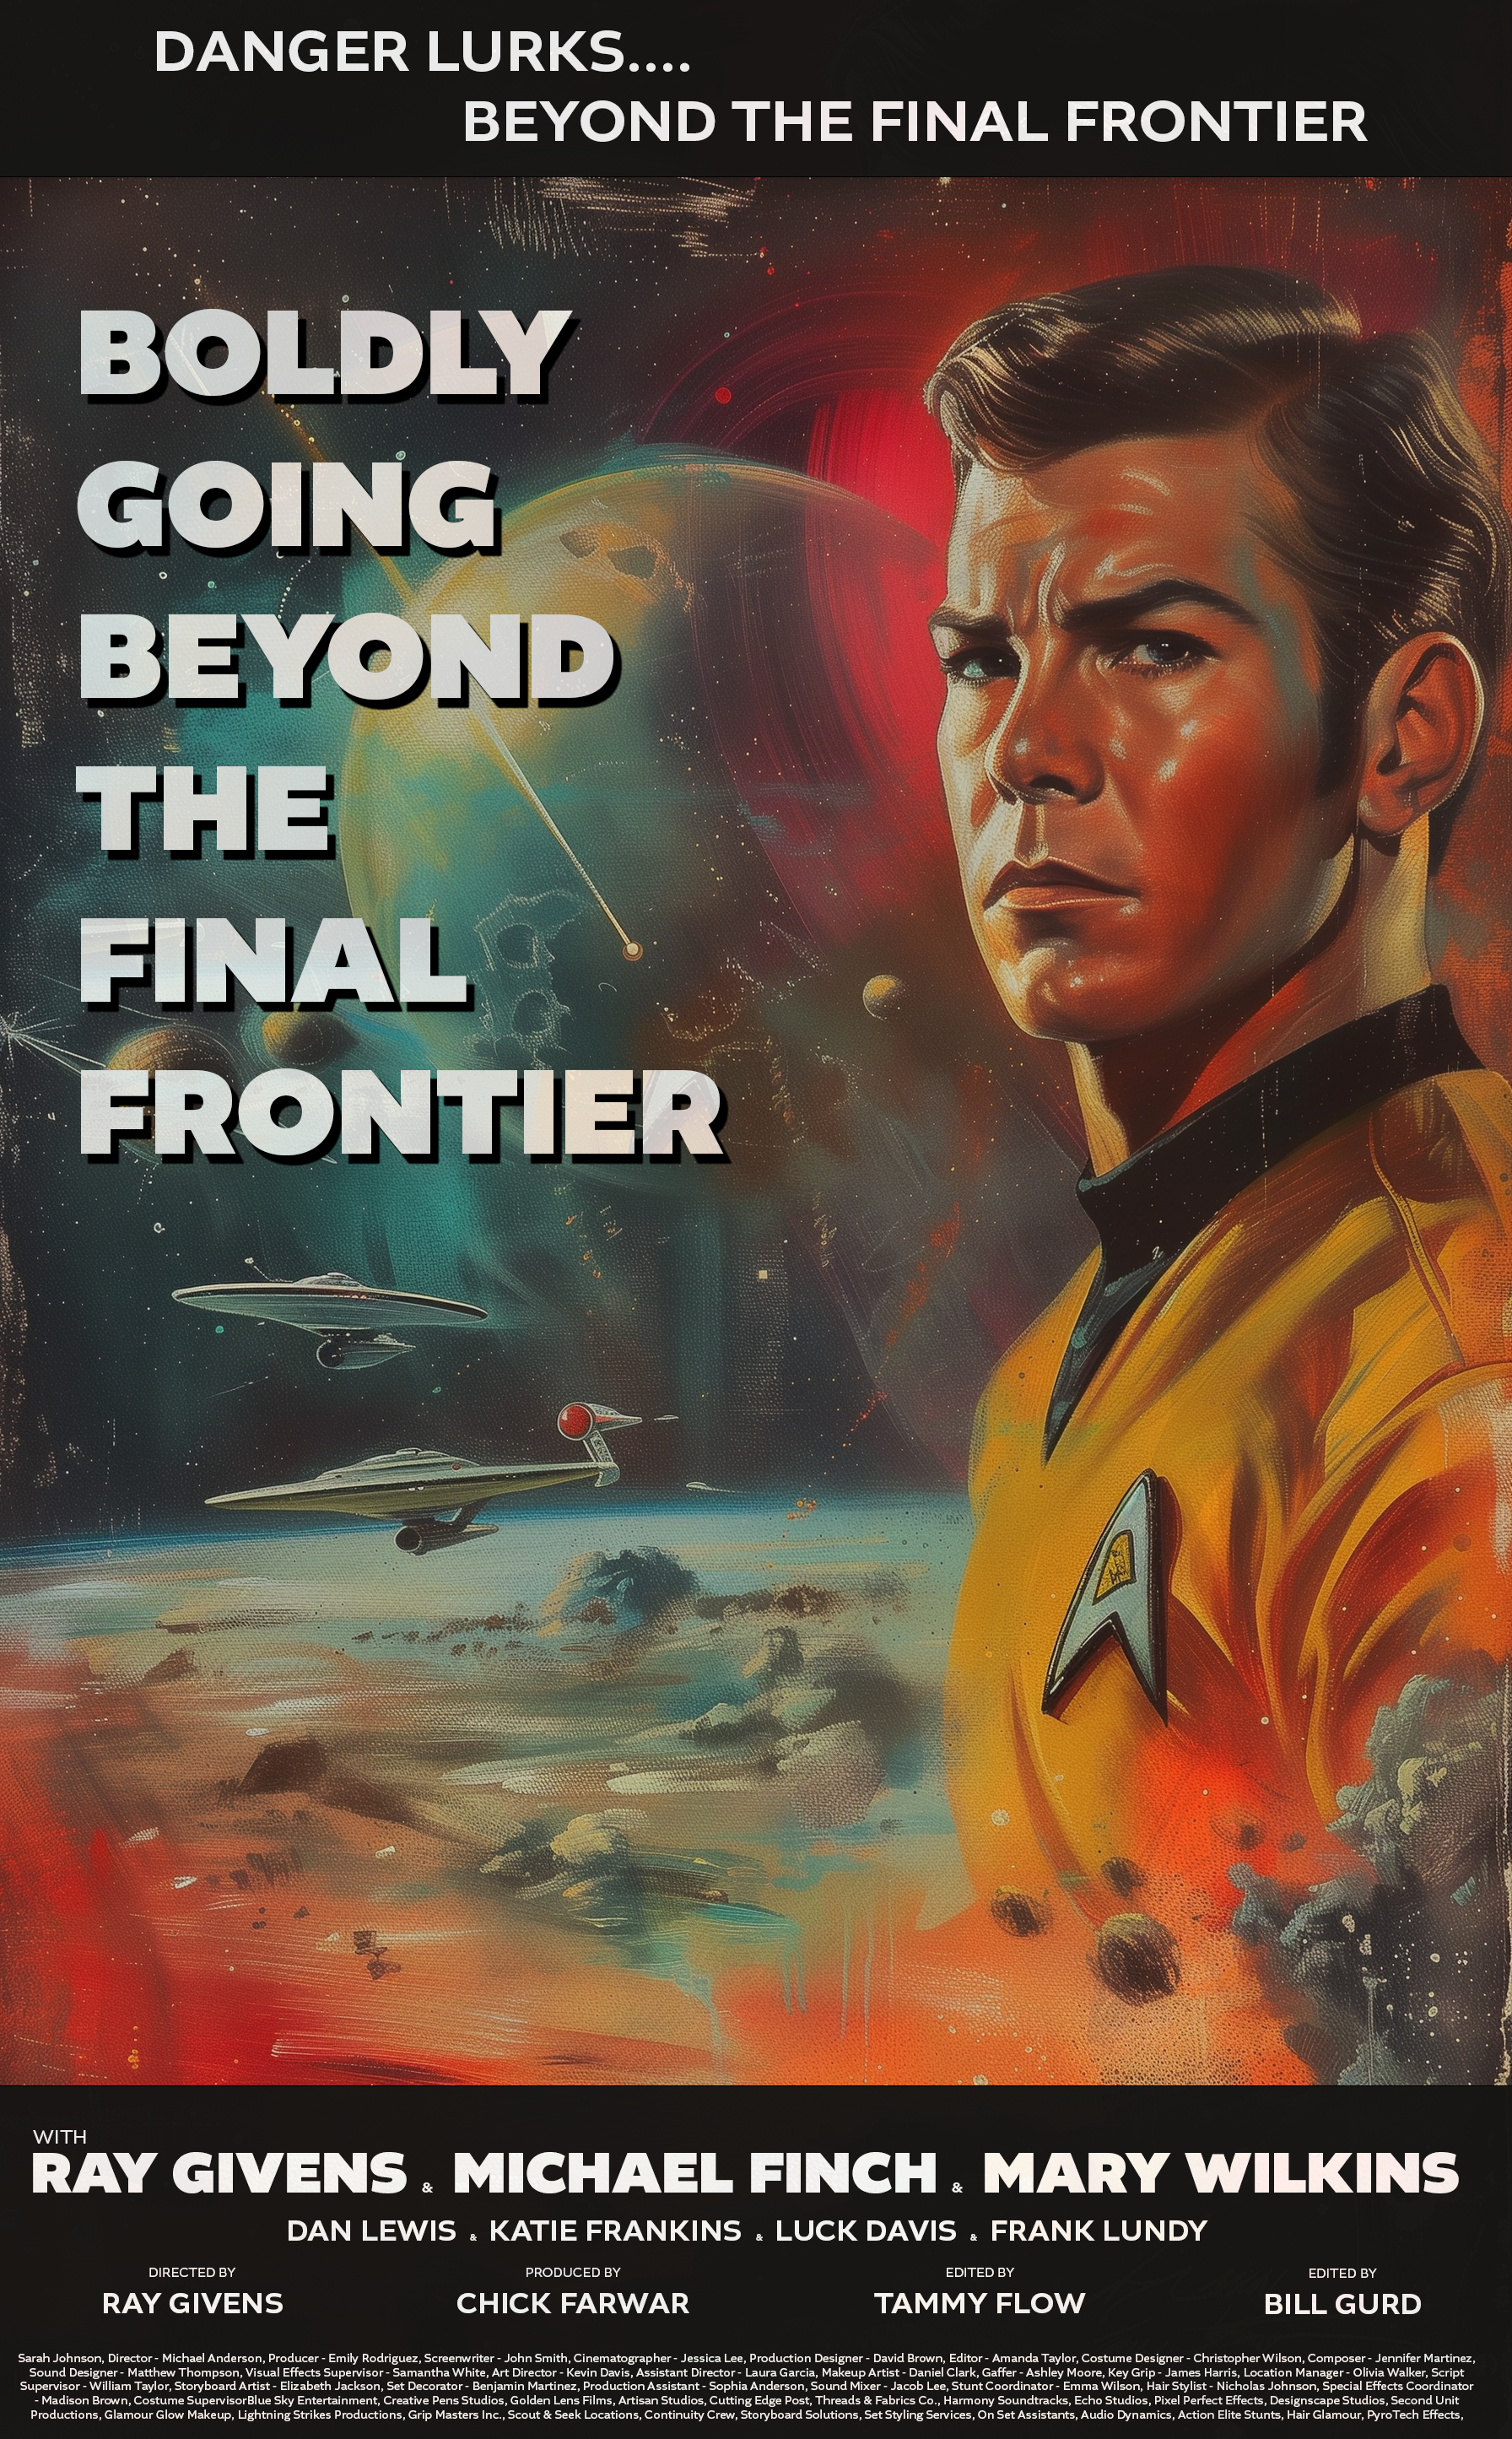 Name:  Beyond the Final Frontier.png
Views: 161
Size:  8.19 MB